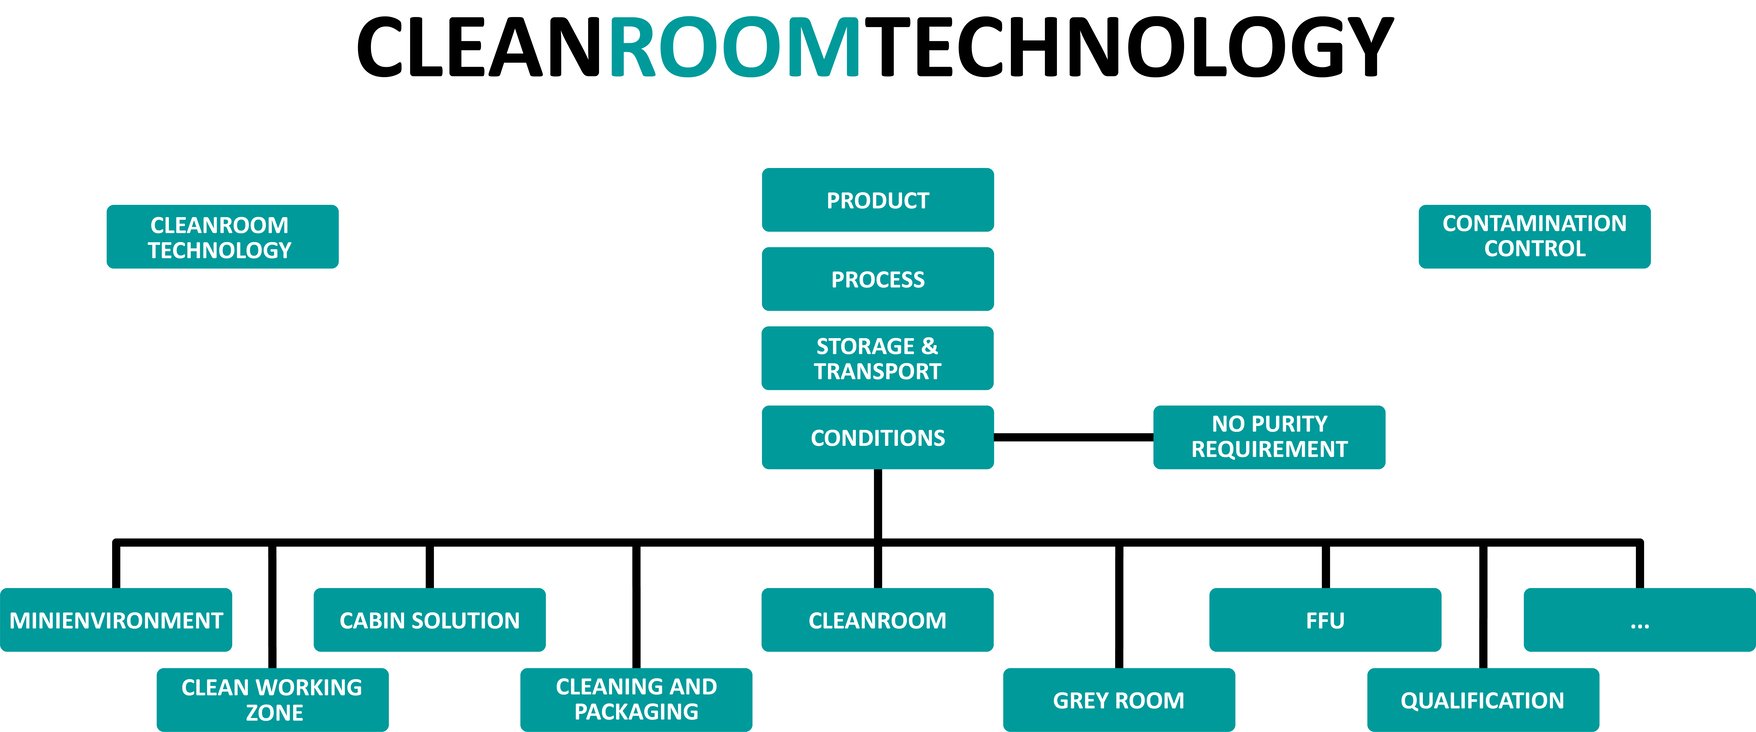 cleanroom-technology-overview